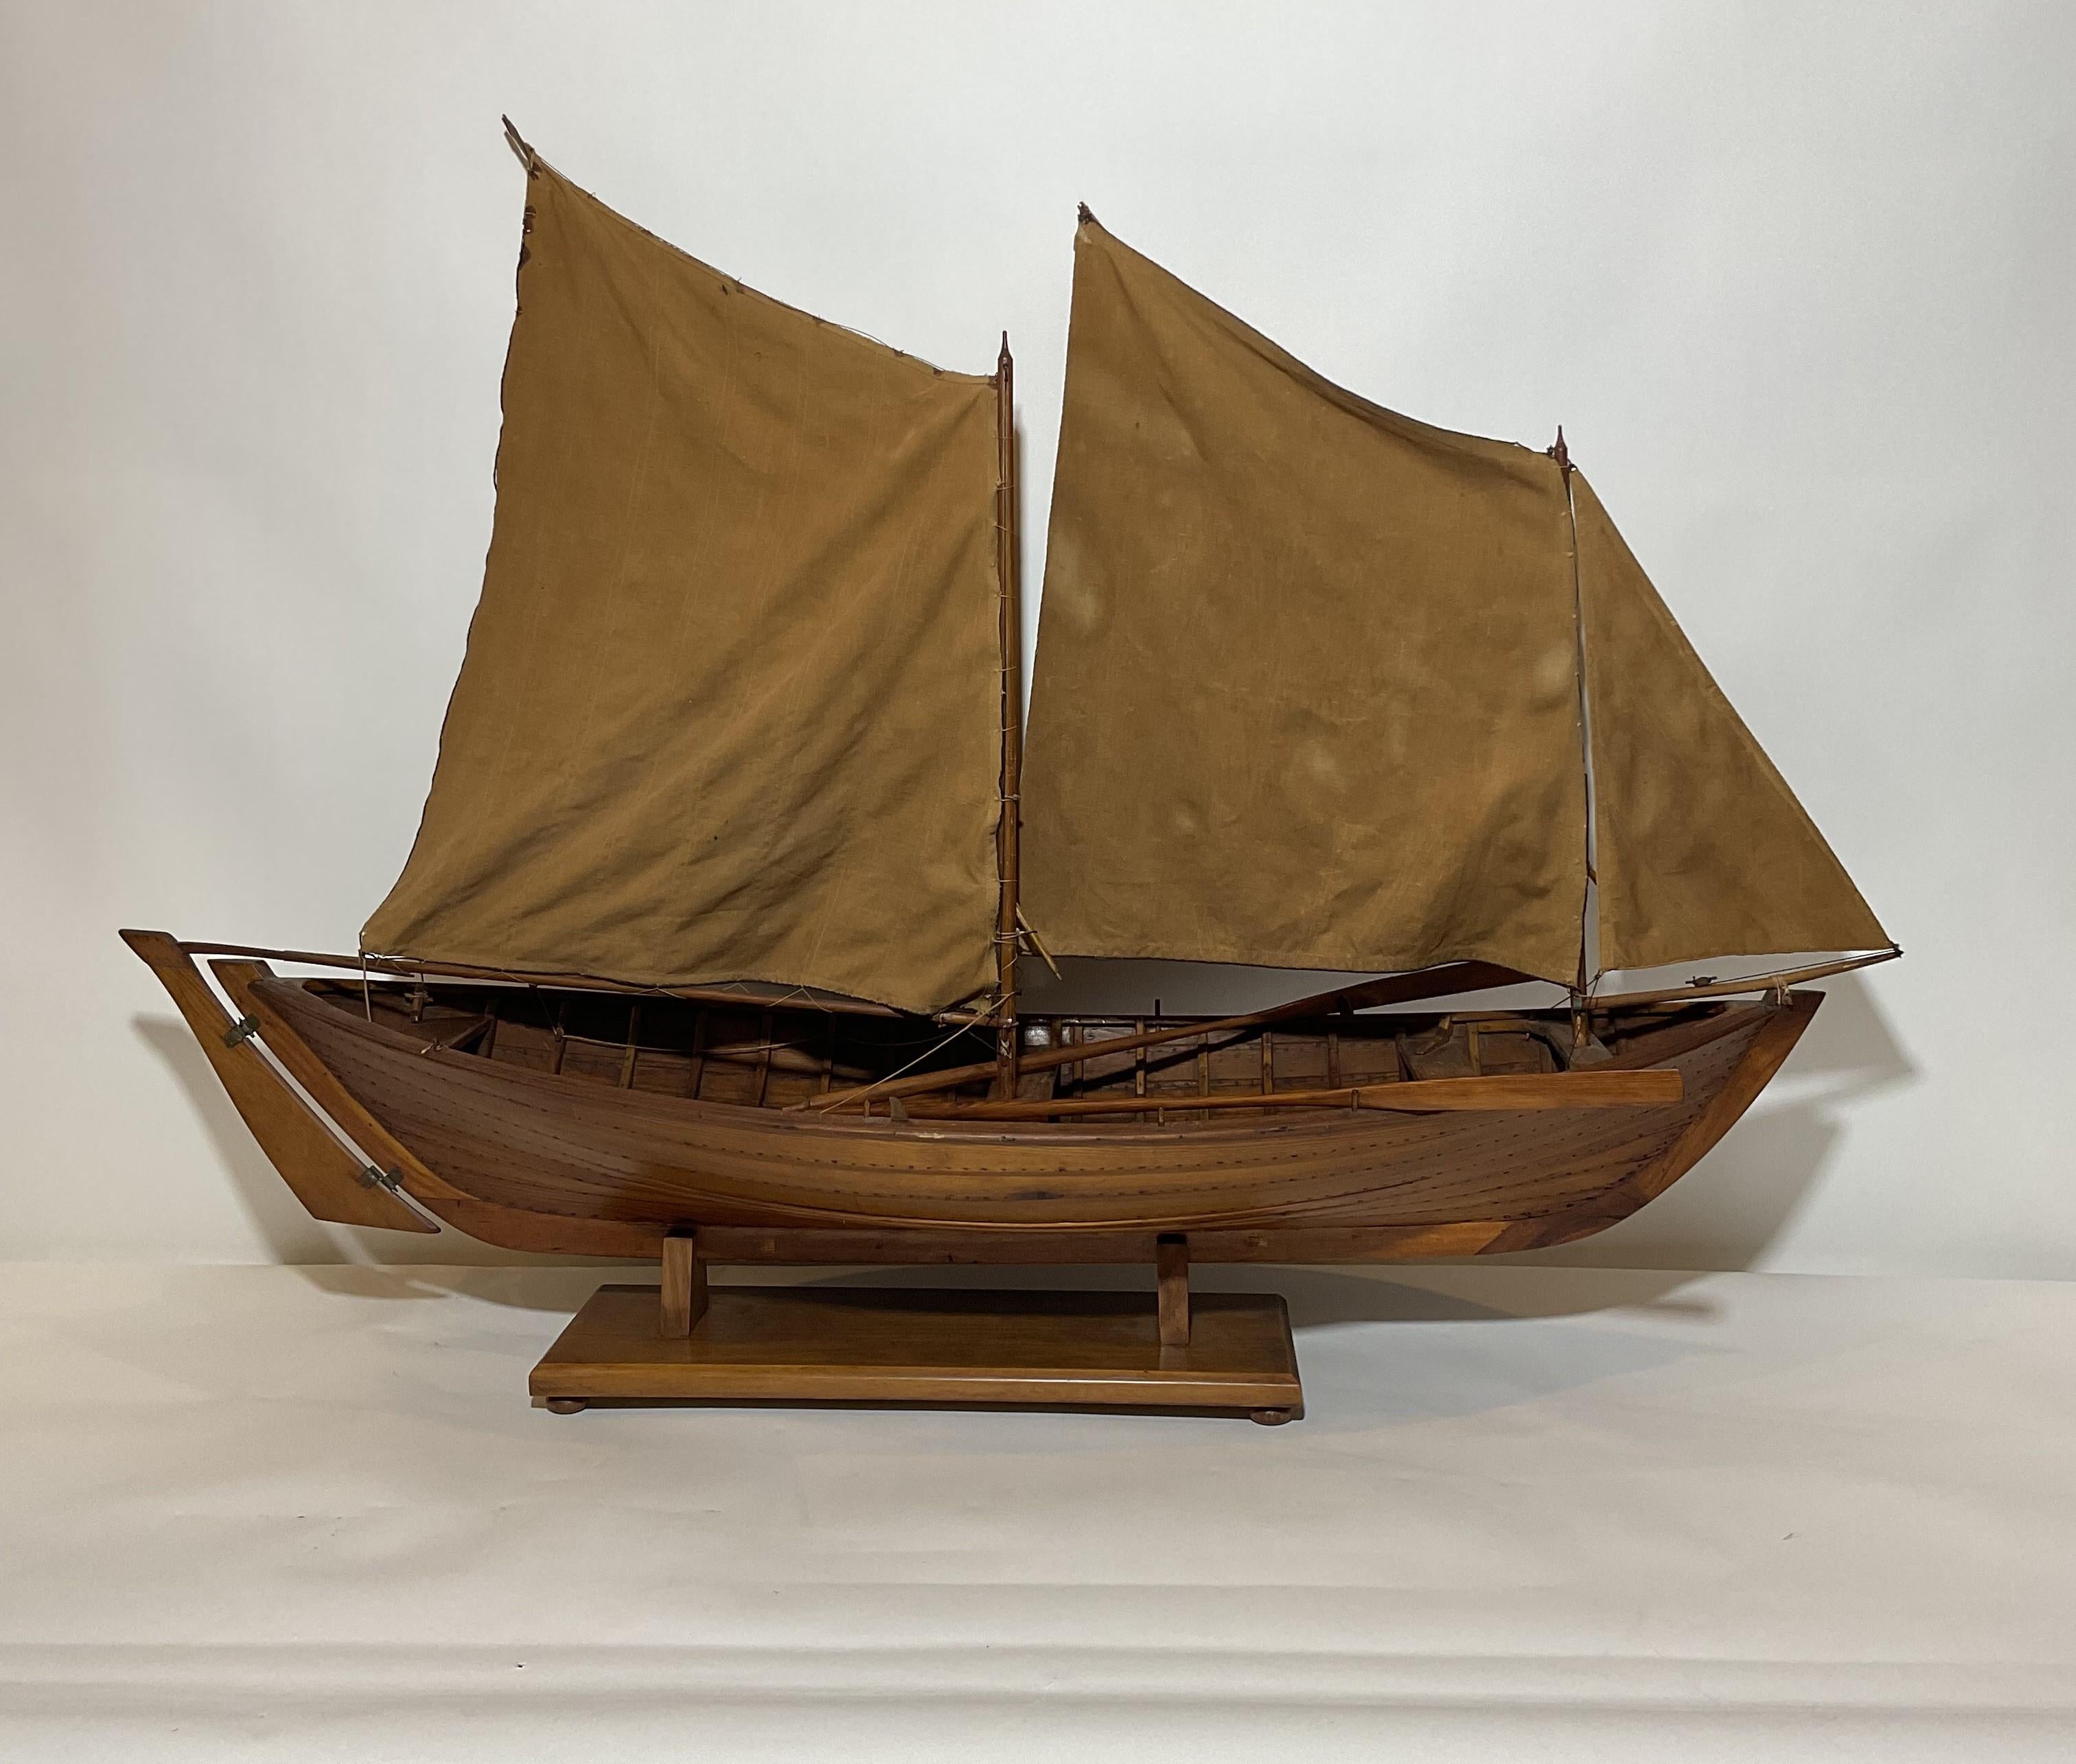 North American Antique Model of a Sailing Launch